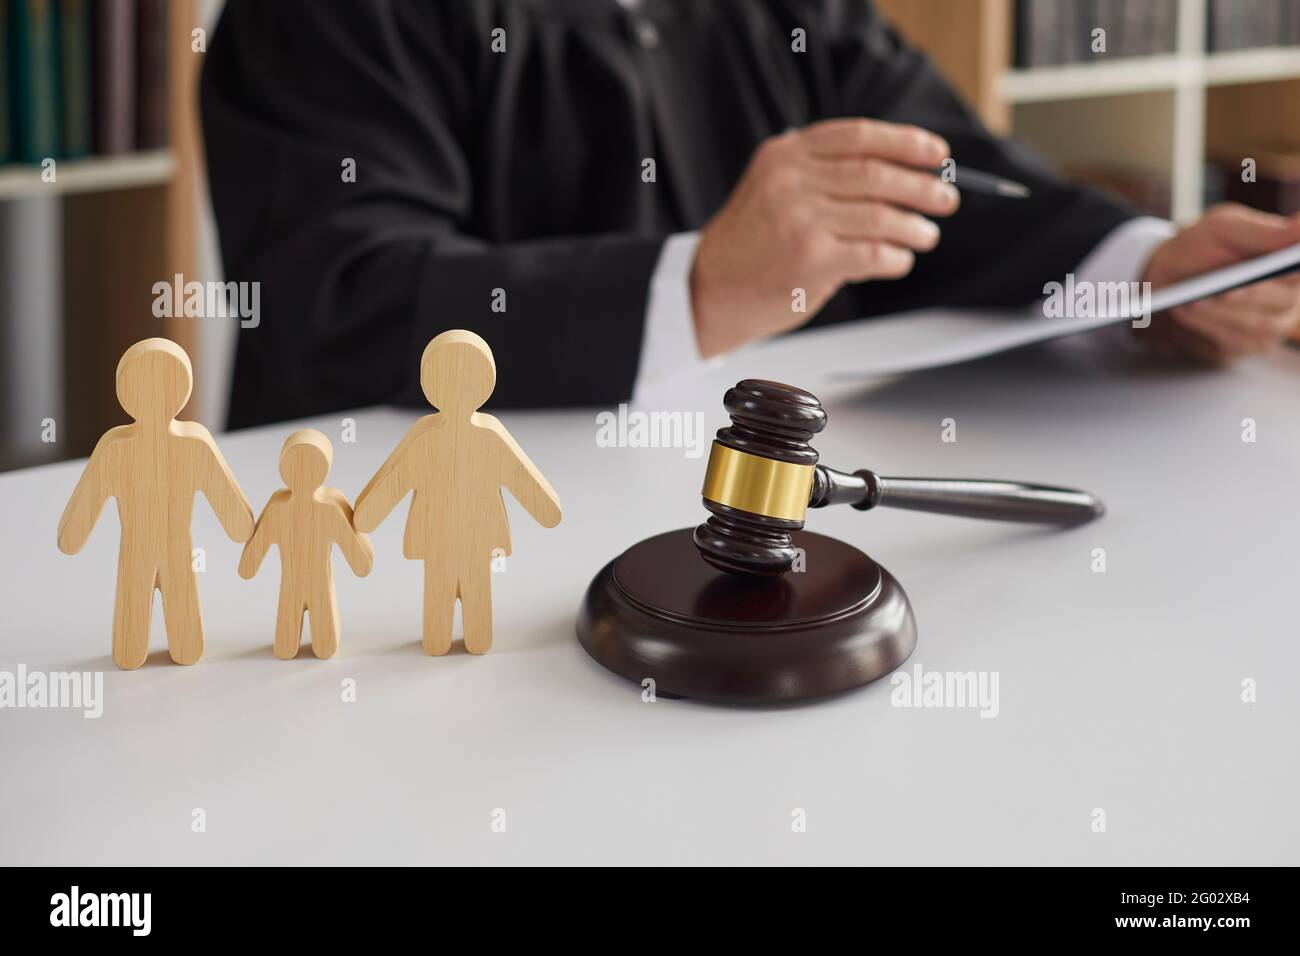 Wooden figurines of family with child and gavel on background of judge conducting divorce process. Stock Photo